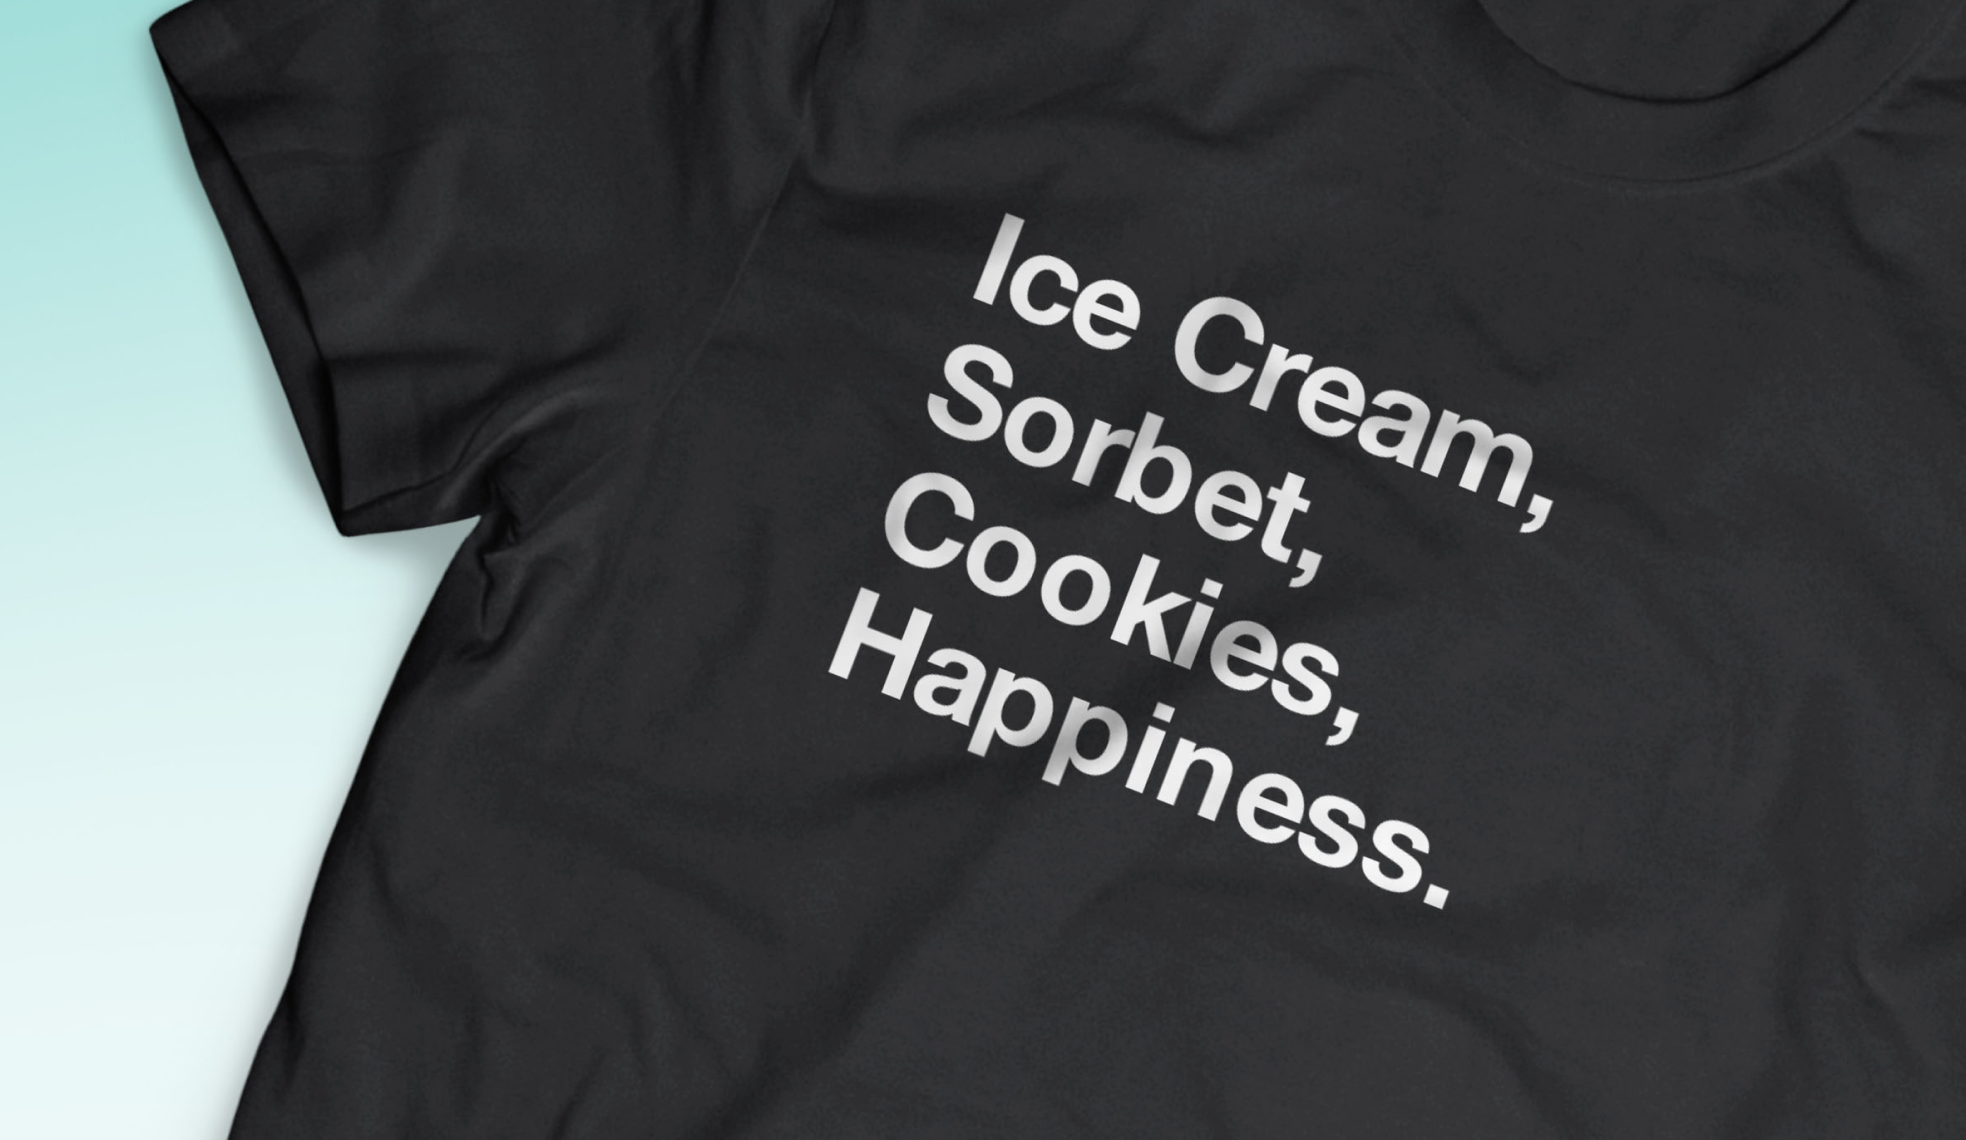 A black t-shirt with words 'Ice Cream, Sorbet, Cookies, Happiness'.